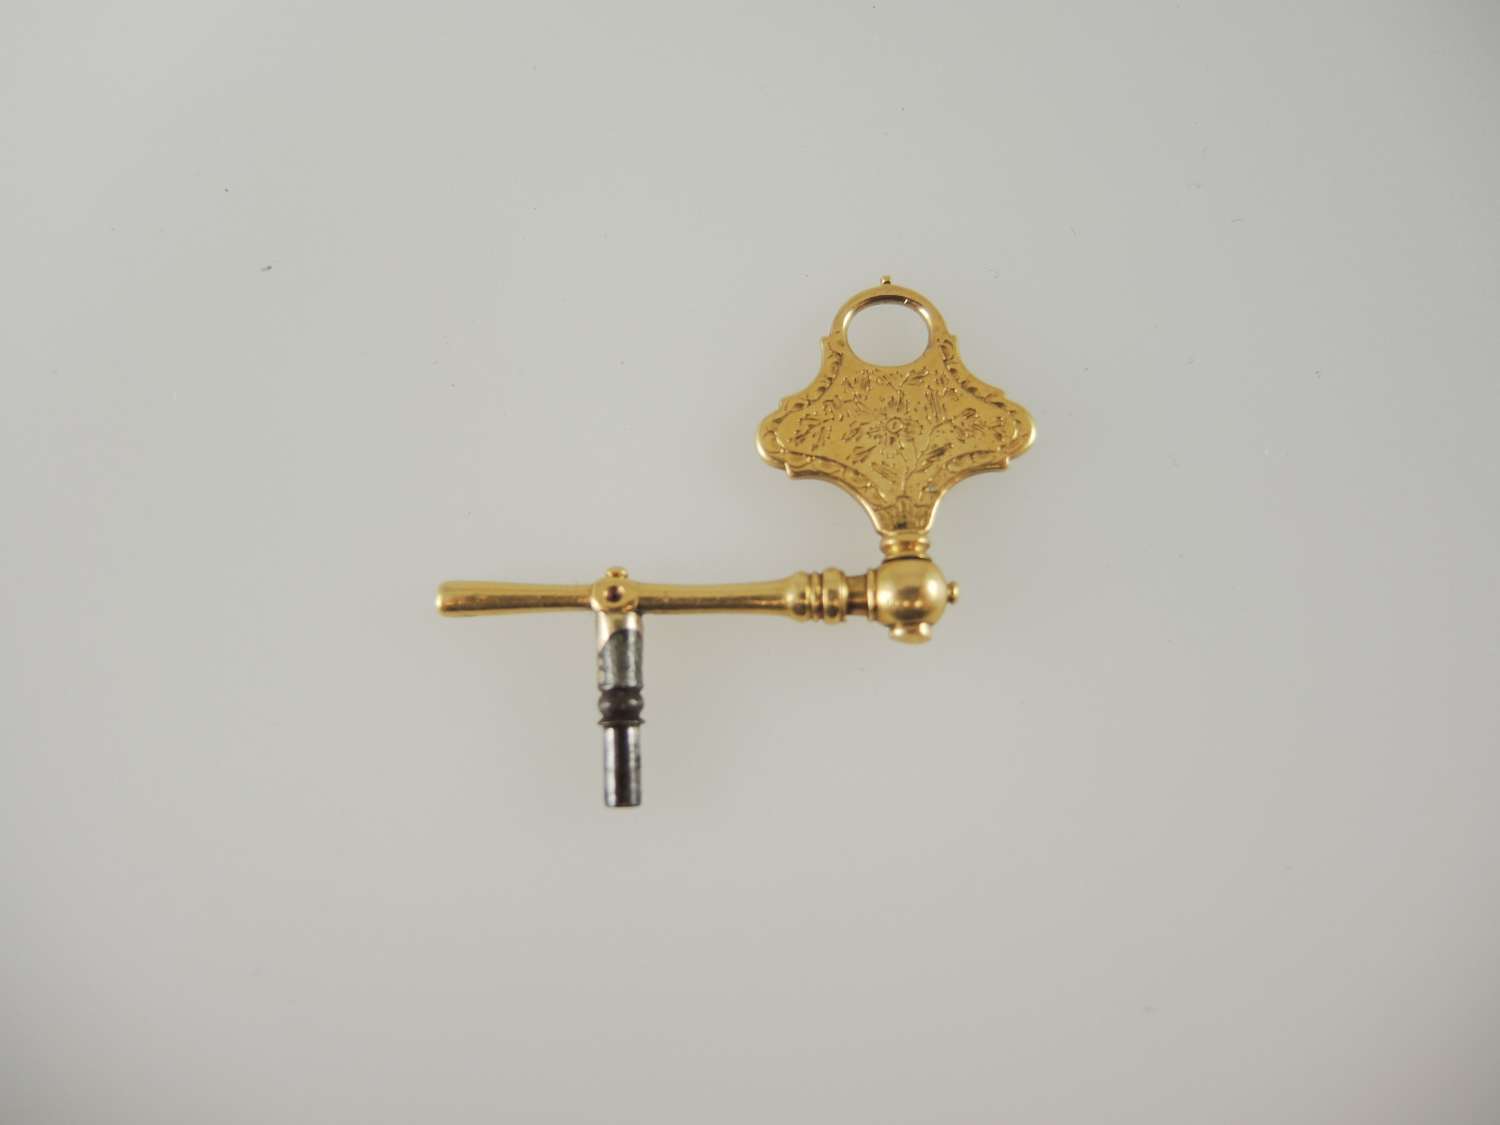 Solid 18K Gold Double ended Crank Key c1770